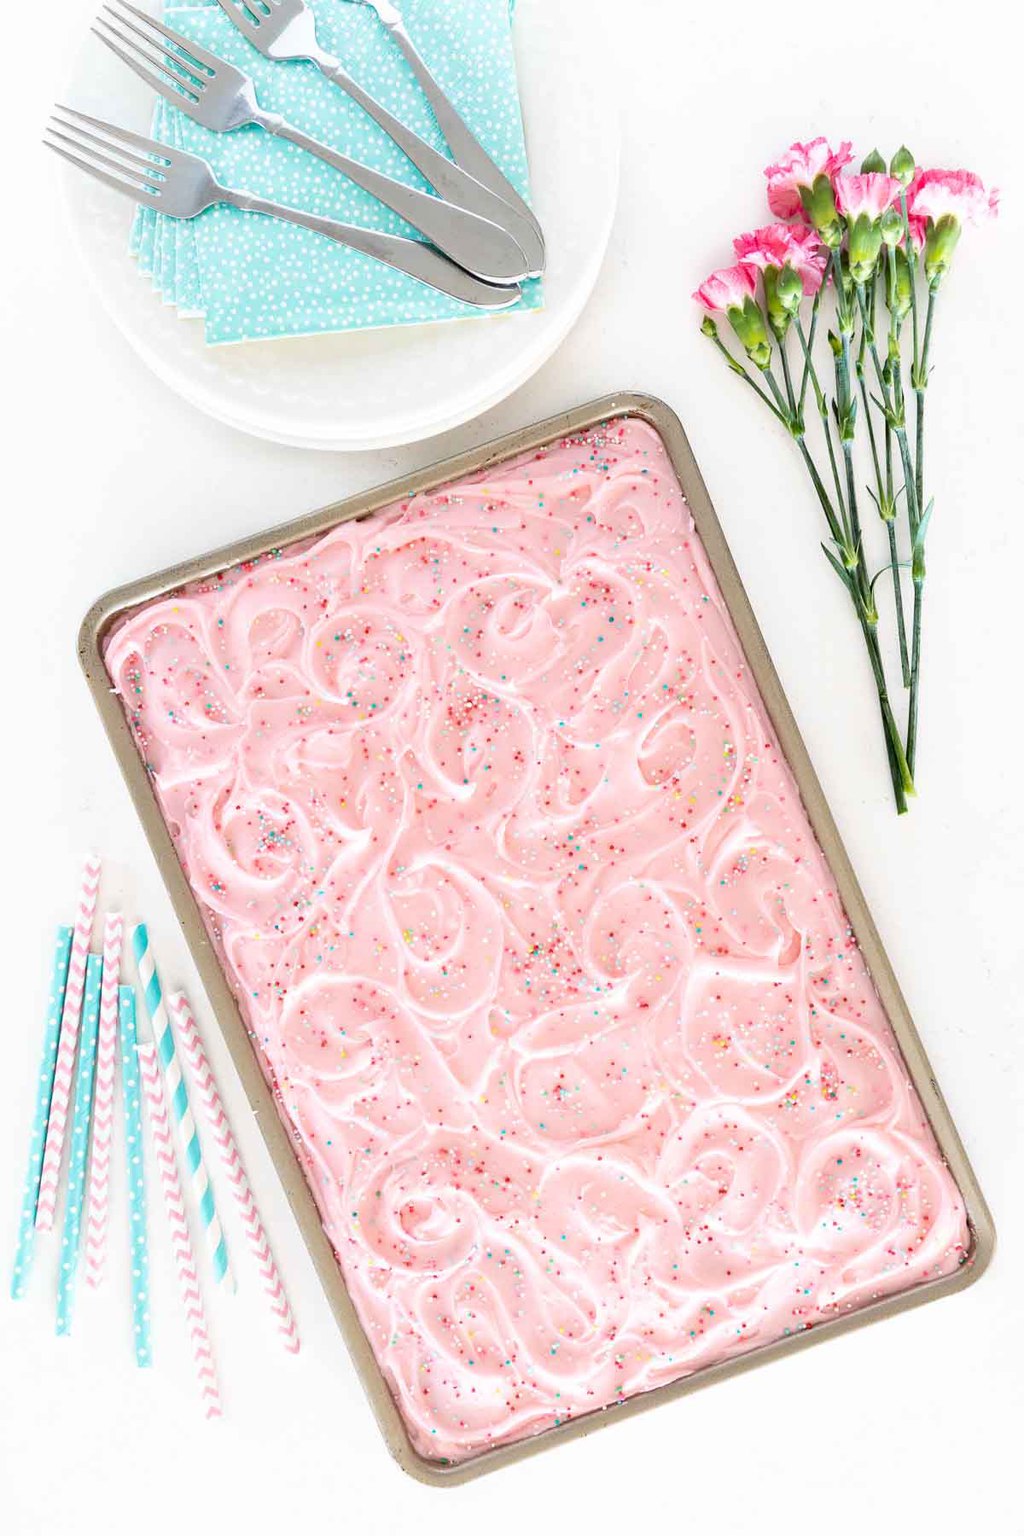 Overhead vertical photo of a Funfetti Sheet Cake with pink icing in a sheet pan .